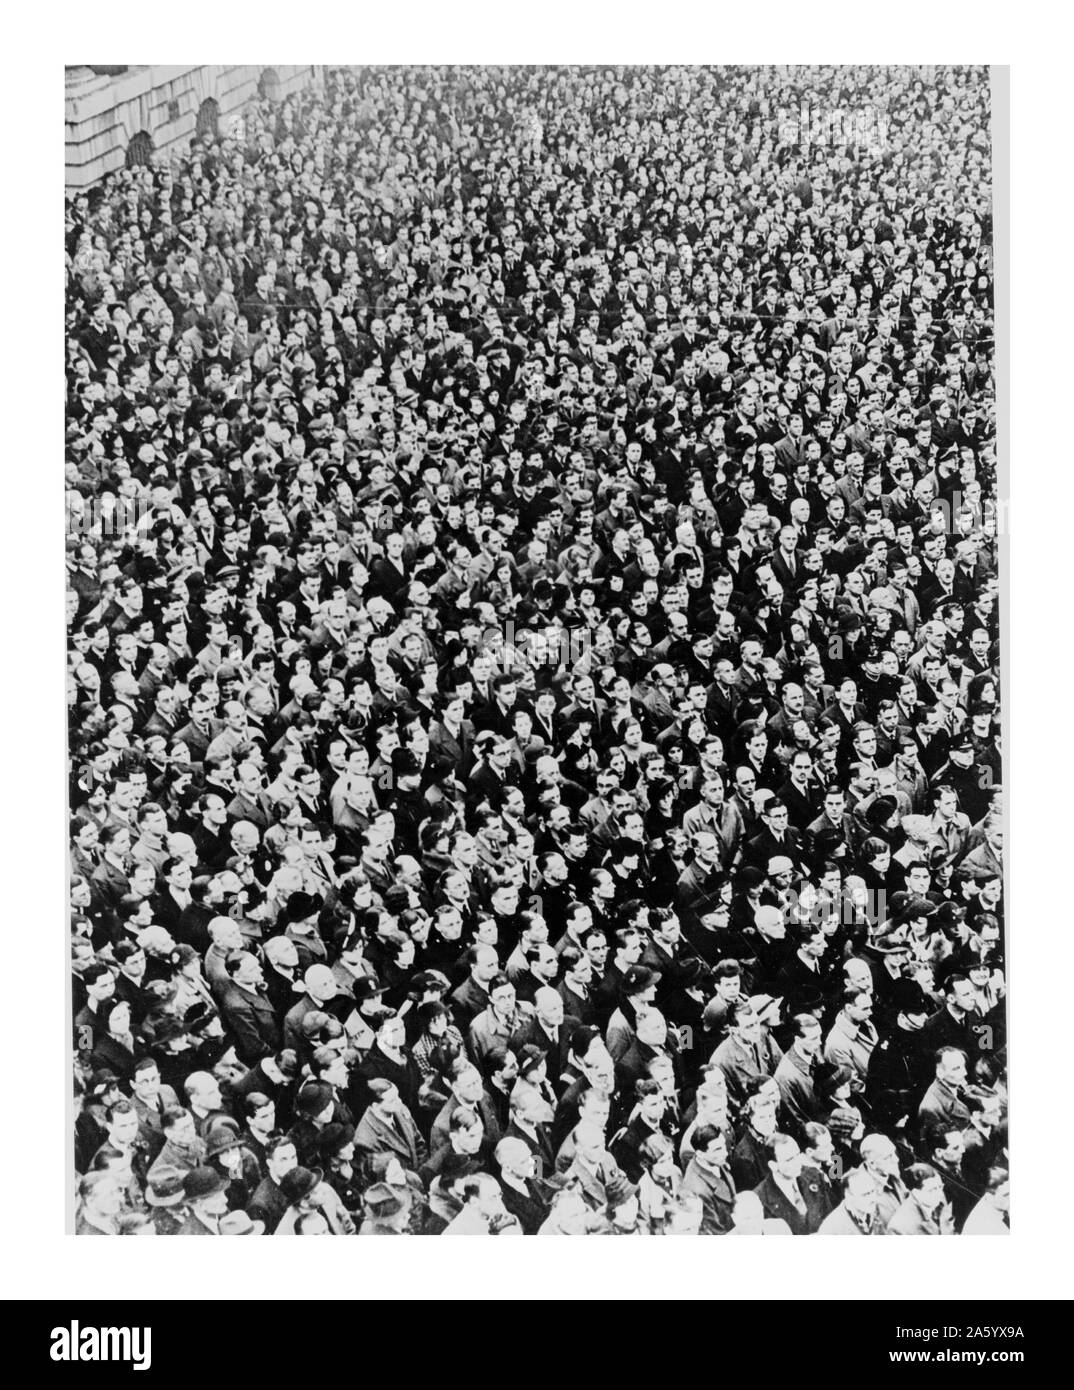 London, England. Crowd on Armistice day, at the end of world war two in Europe, 1945 Stock Photo